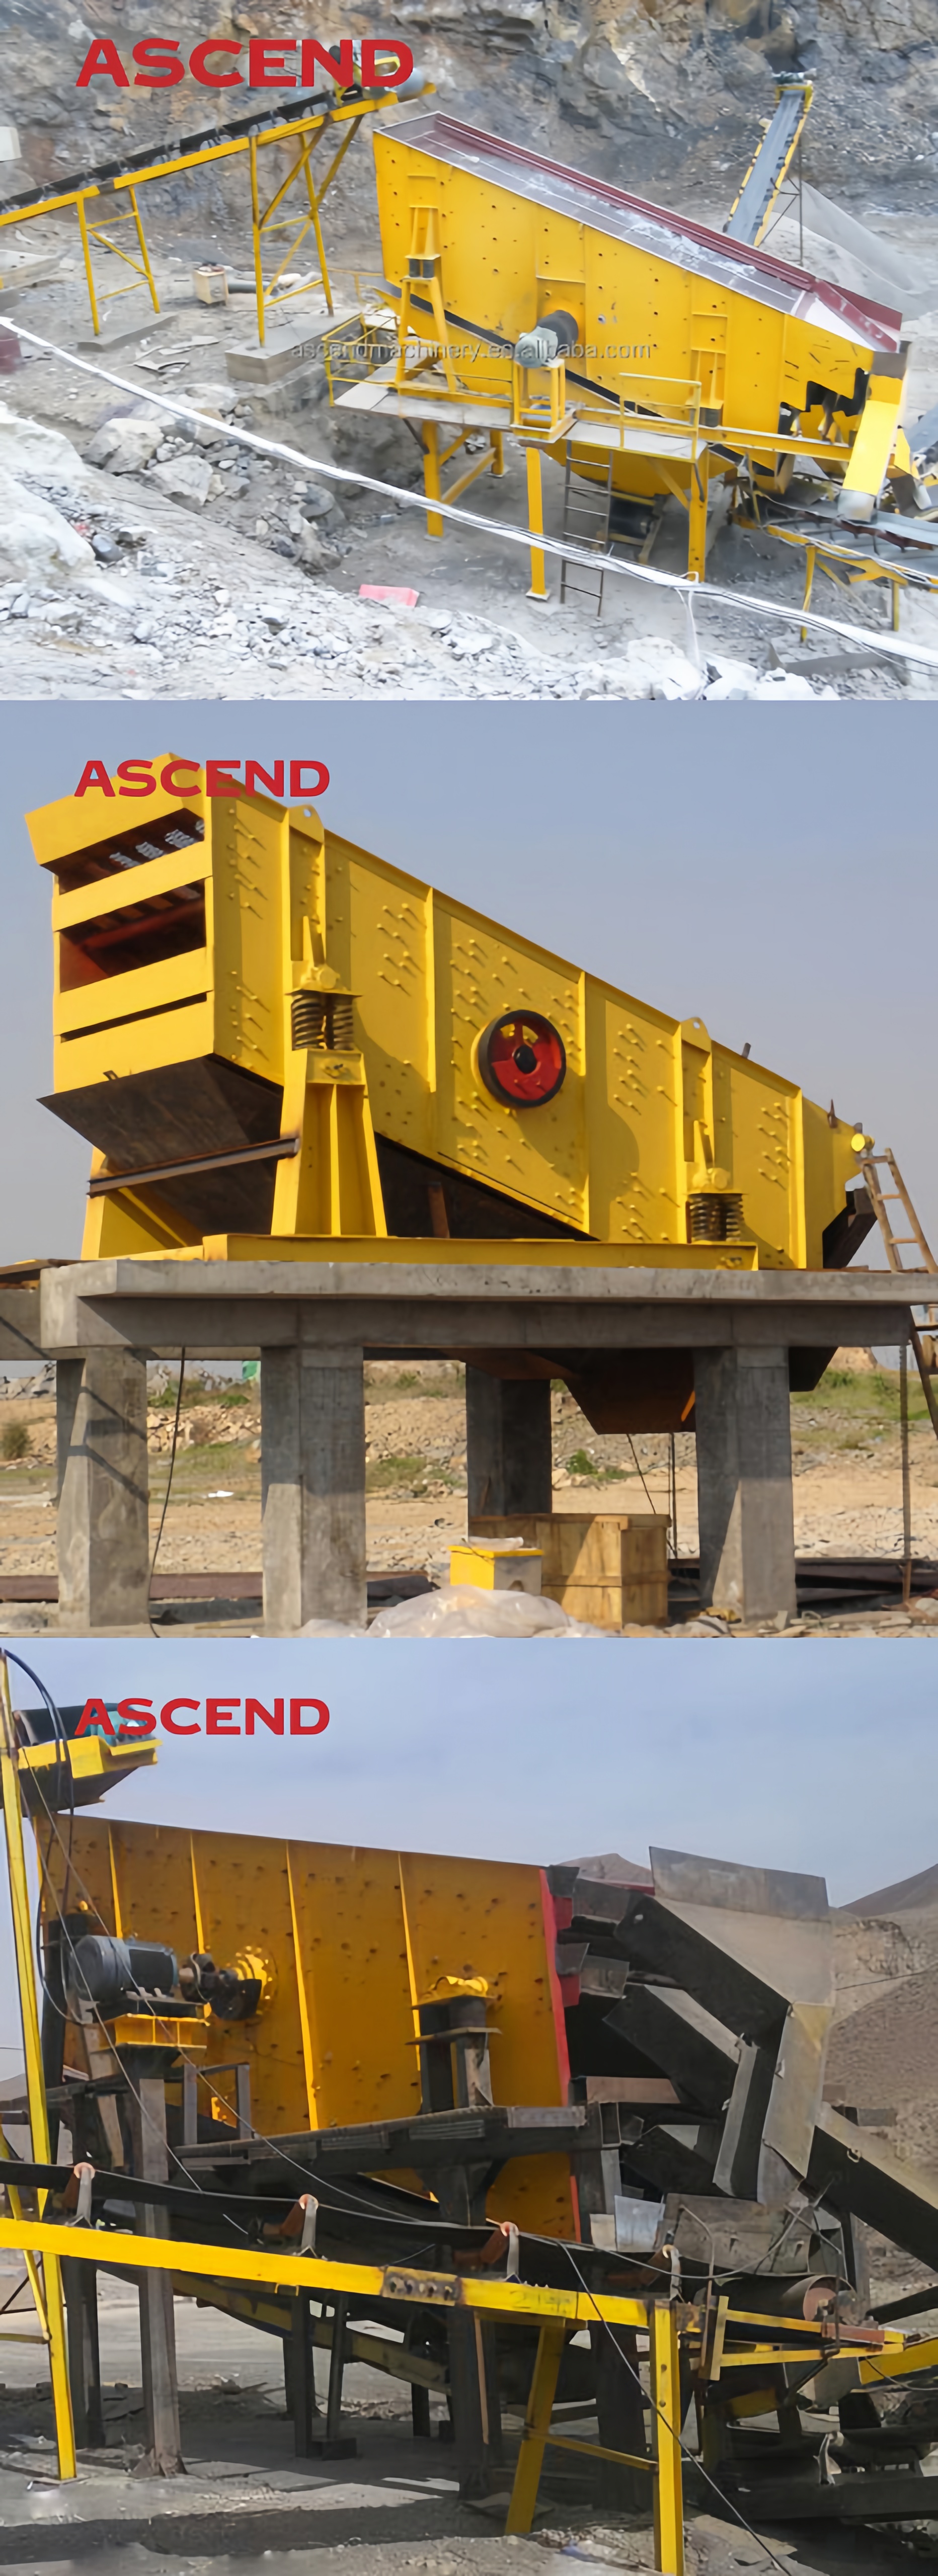 Vibrating Screen Drawing 2 3 4YK1860 Silica Quarry Sandstone Sieving Equipment